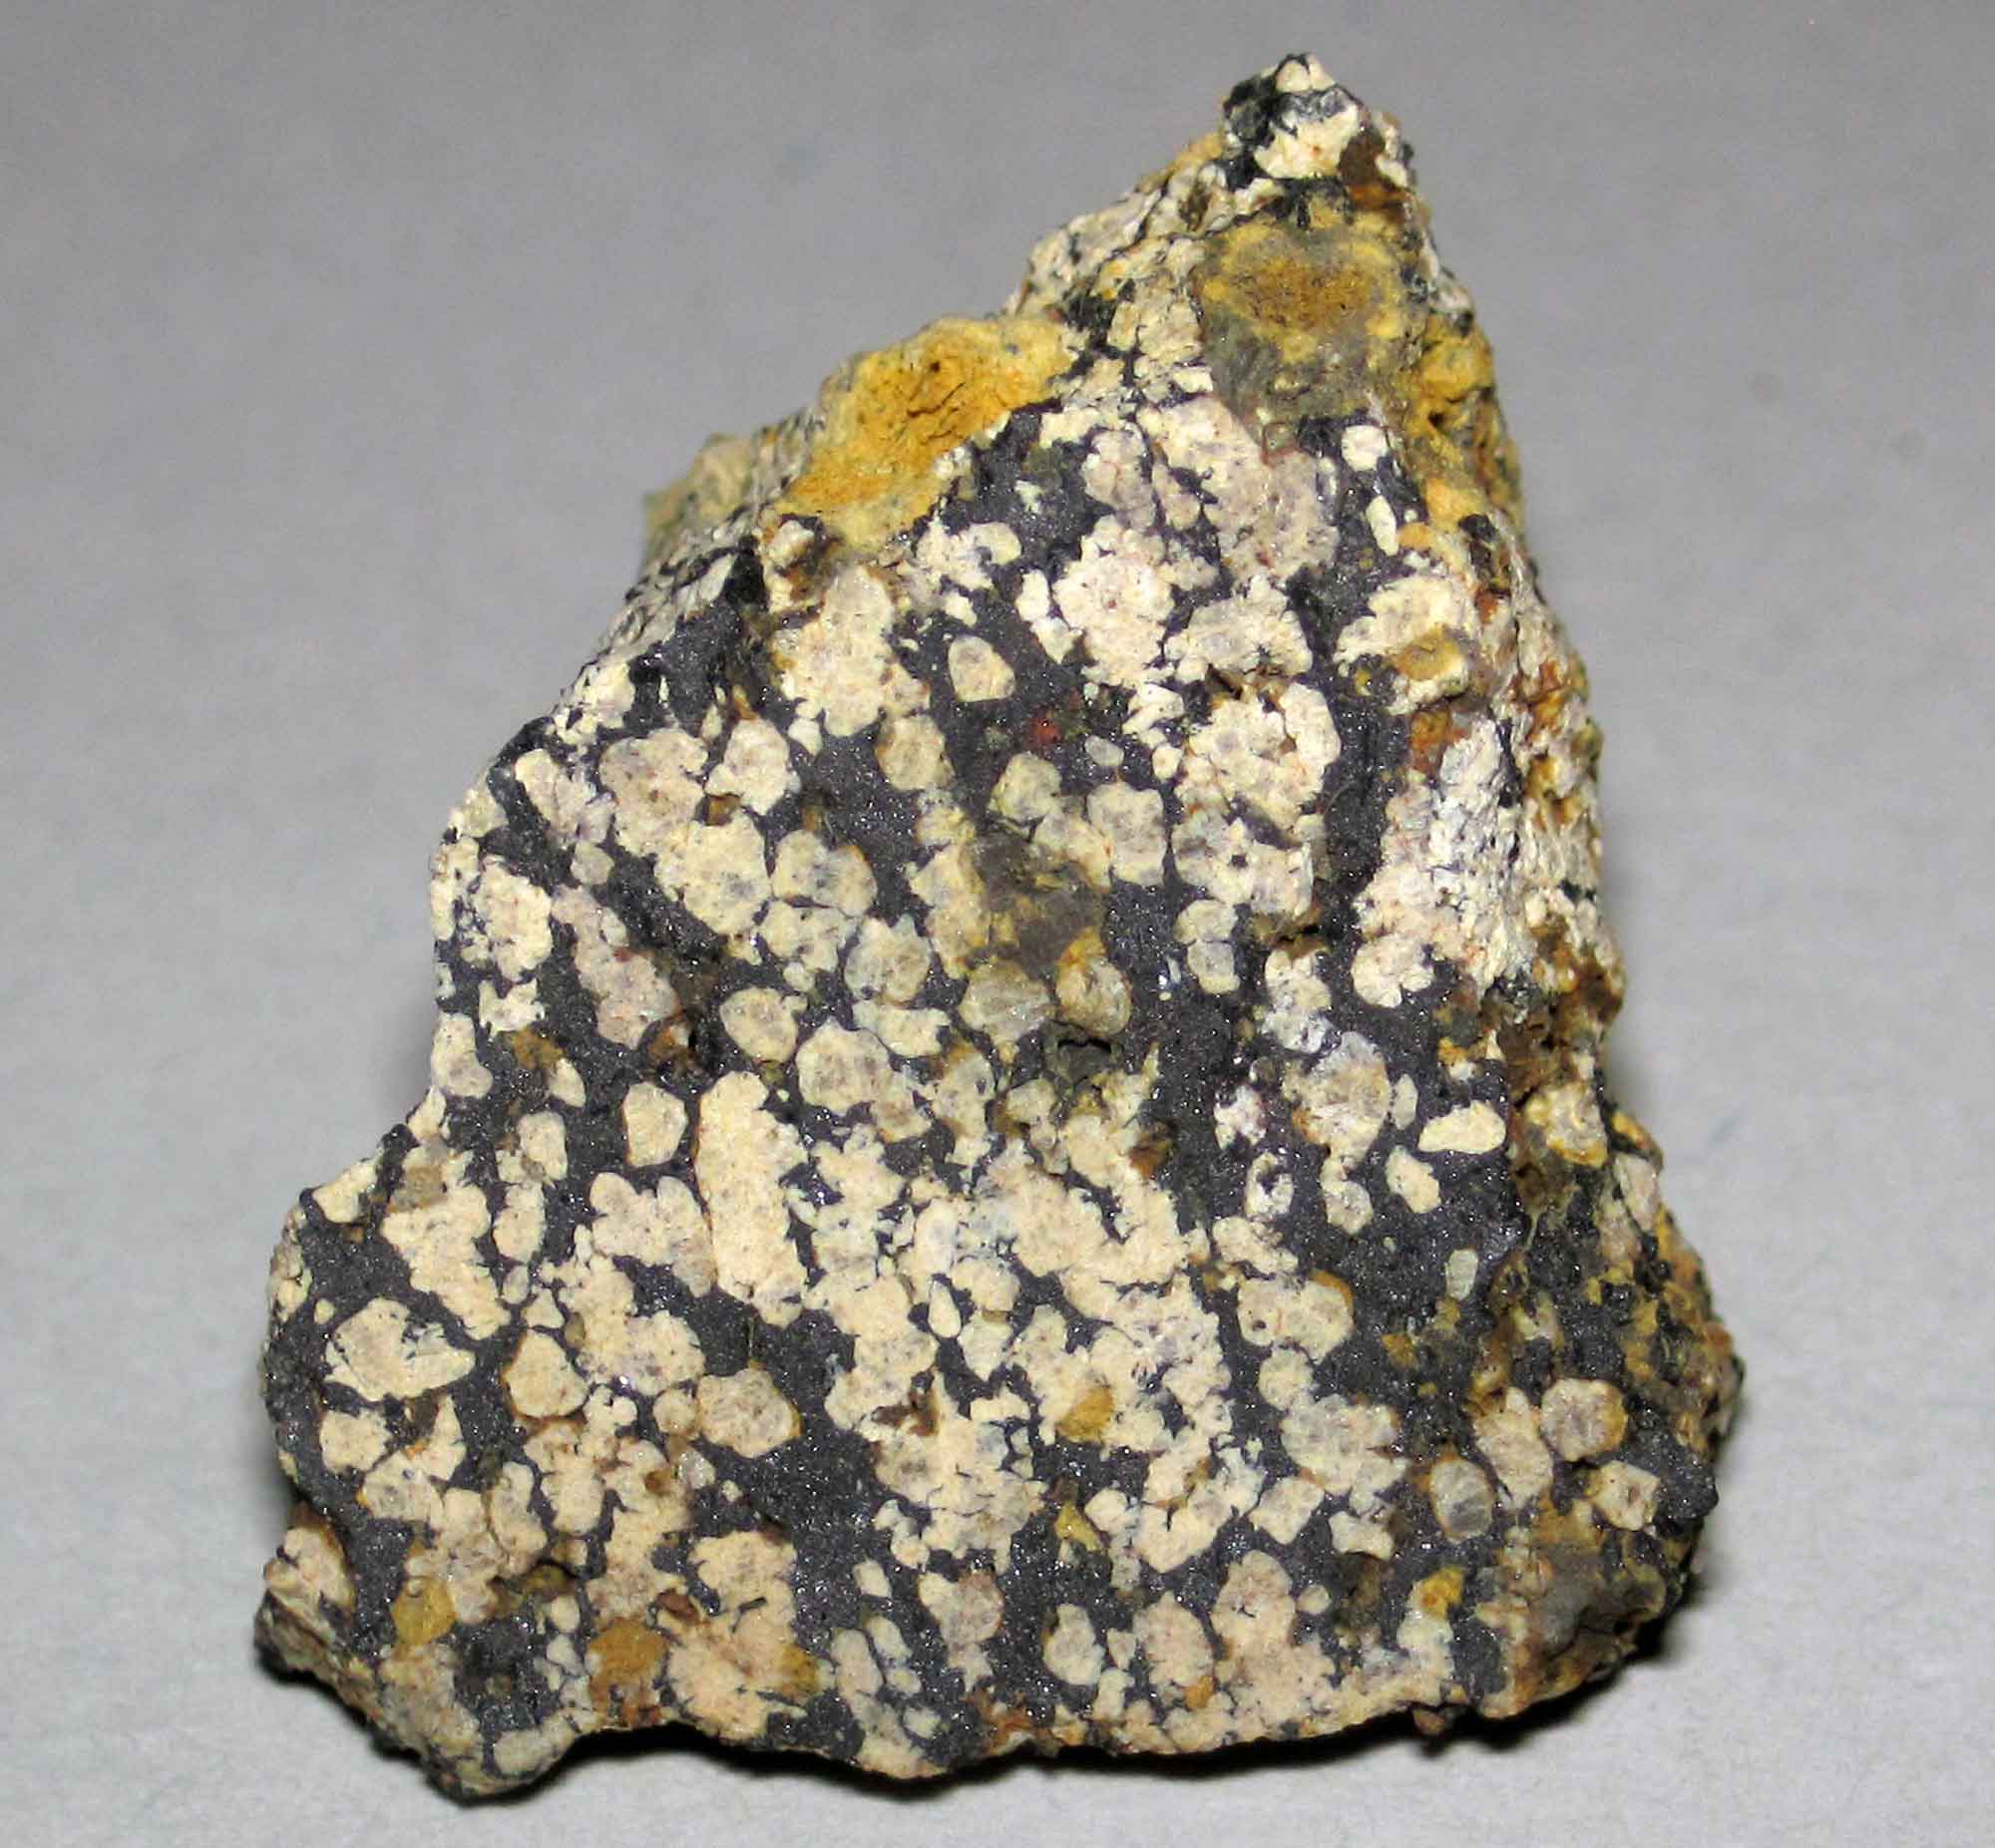 Photograph of a sample of Nelsonite, the state rock of Virginia.